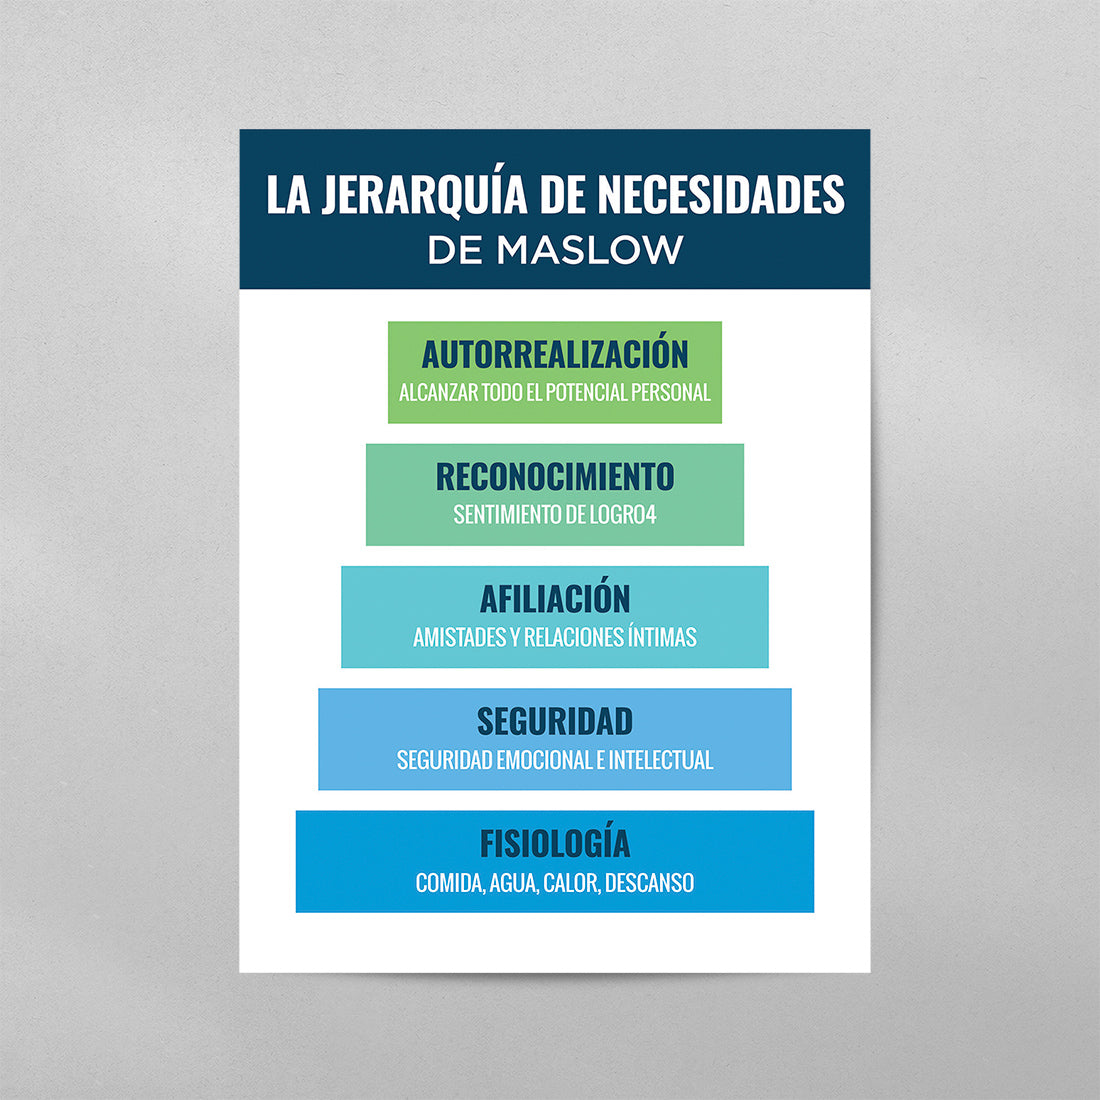 SPANISH Maslow's Hierarchy of Needs